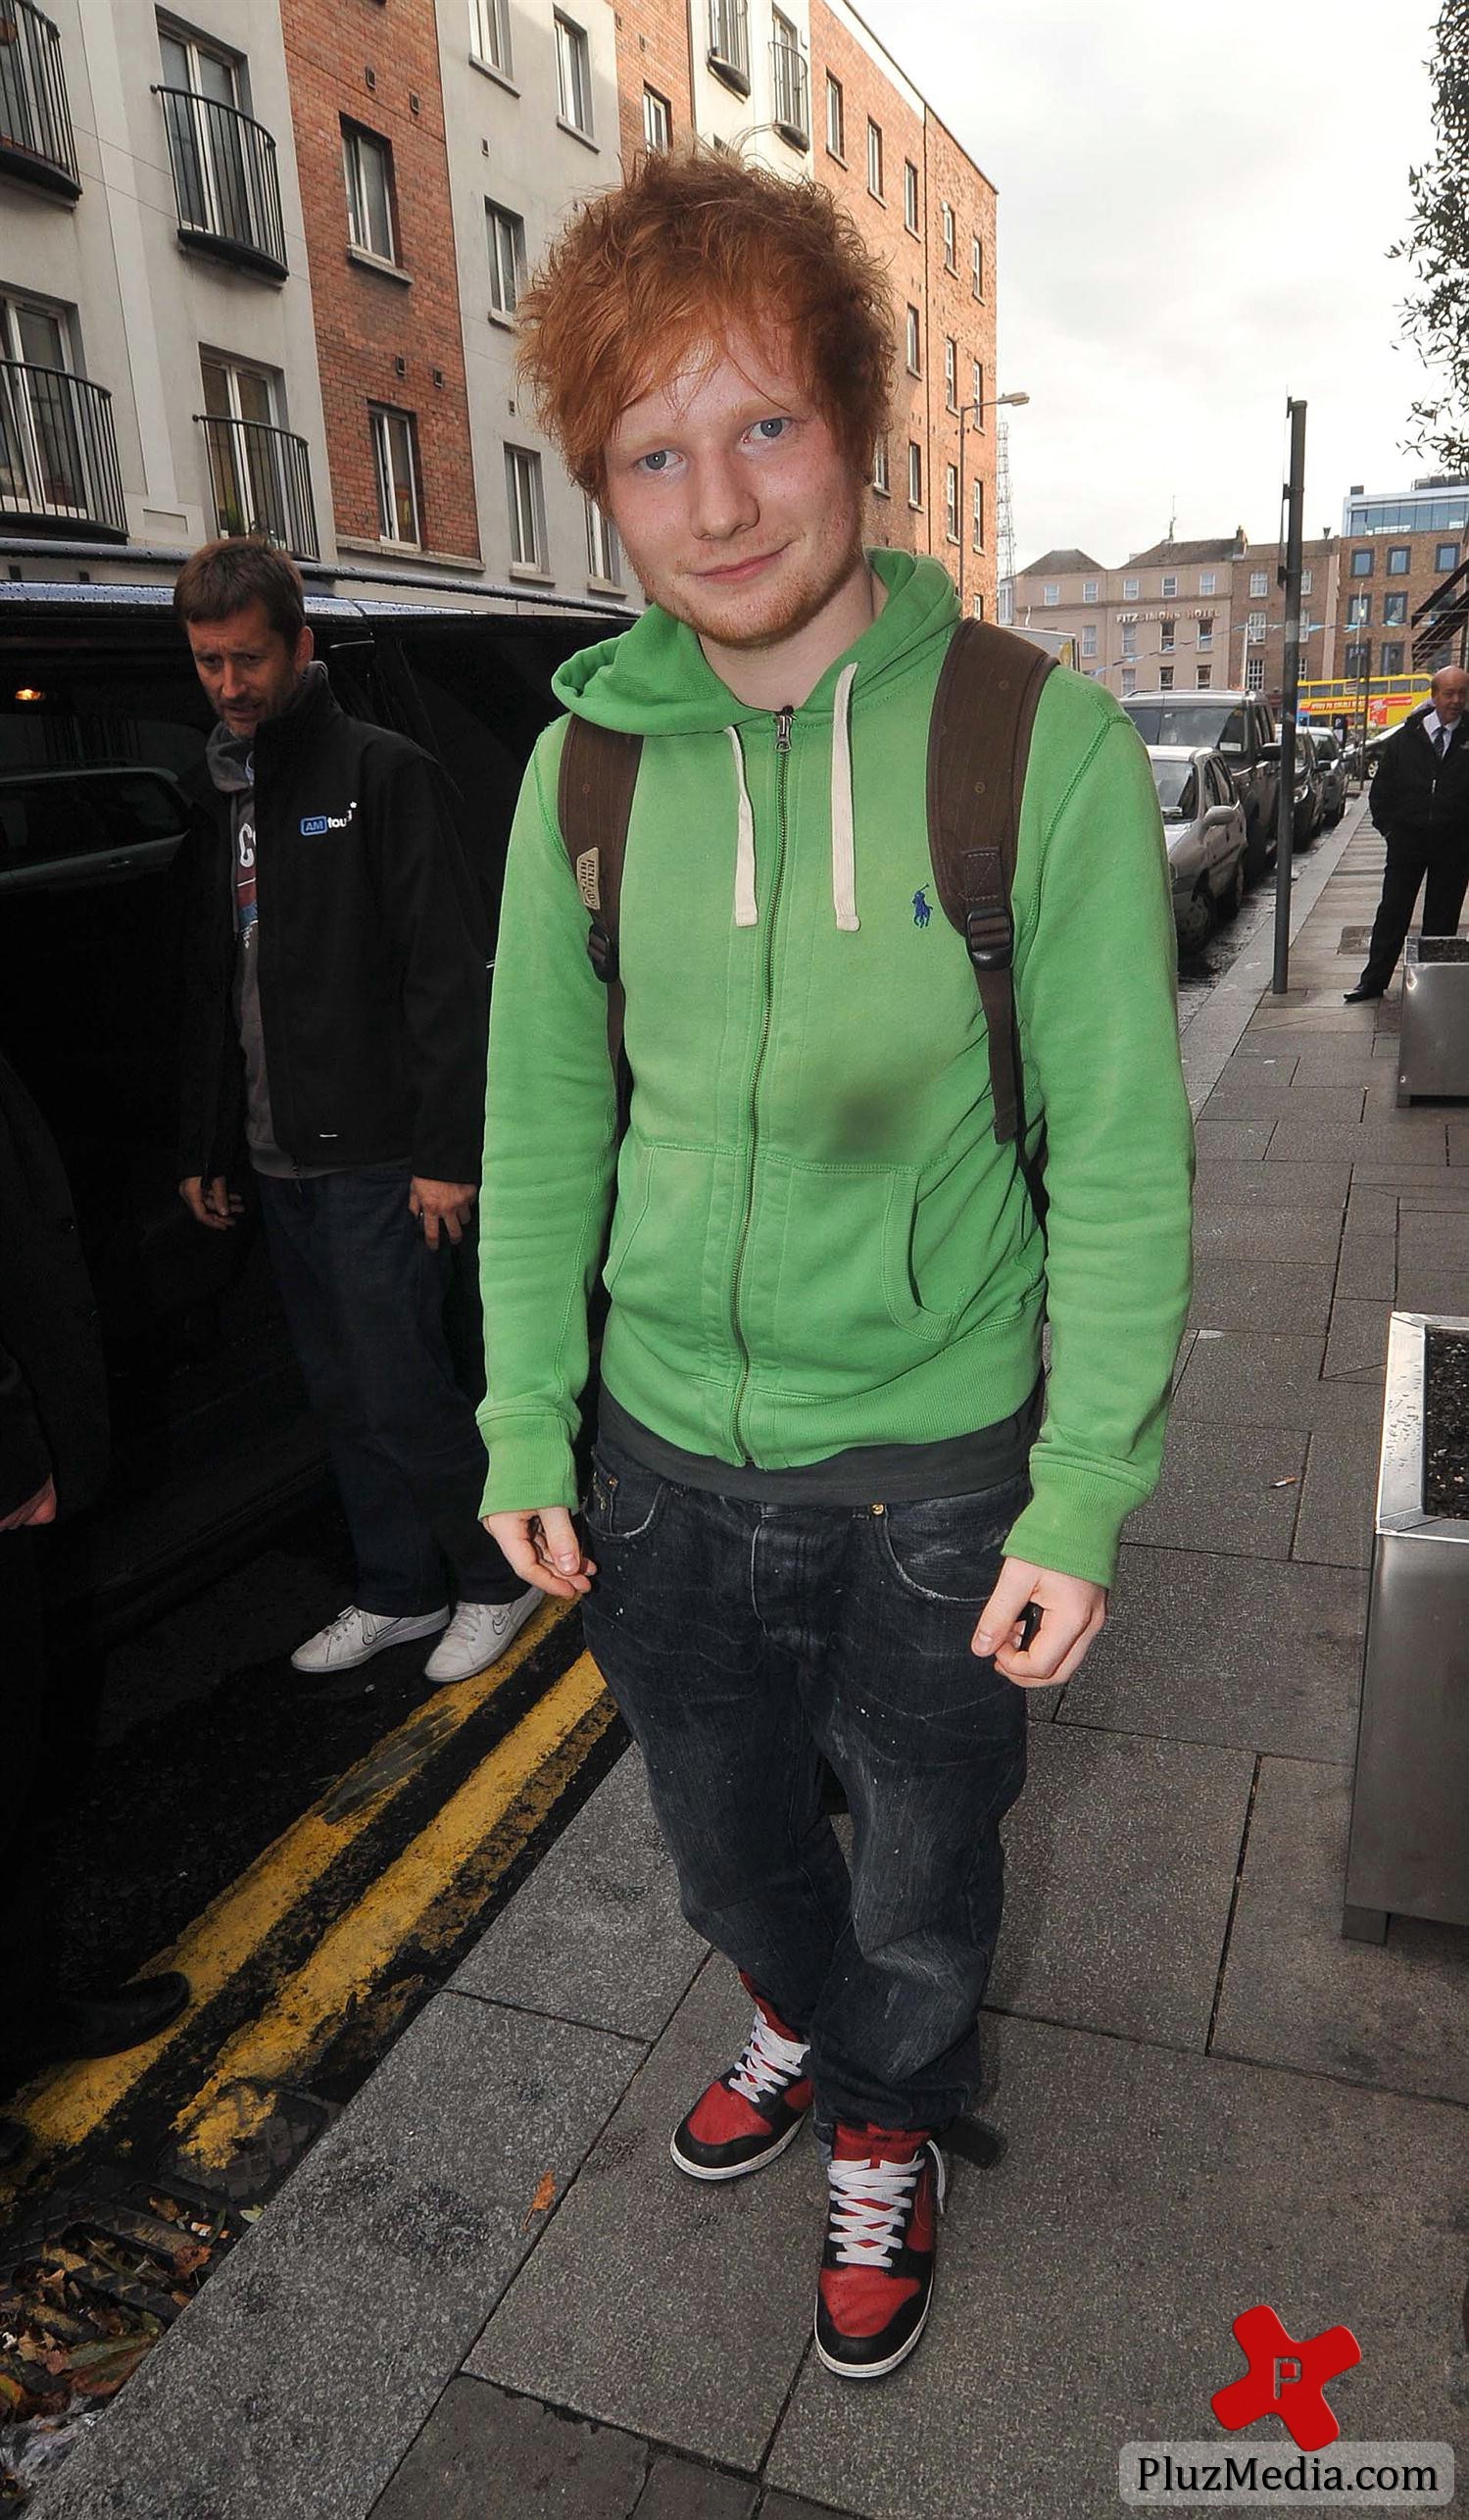 Ed Sheeran - Celebrities participating in Arthur's Day at St James's Gate  | Picture 84068